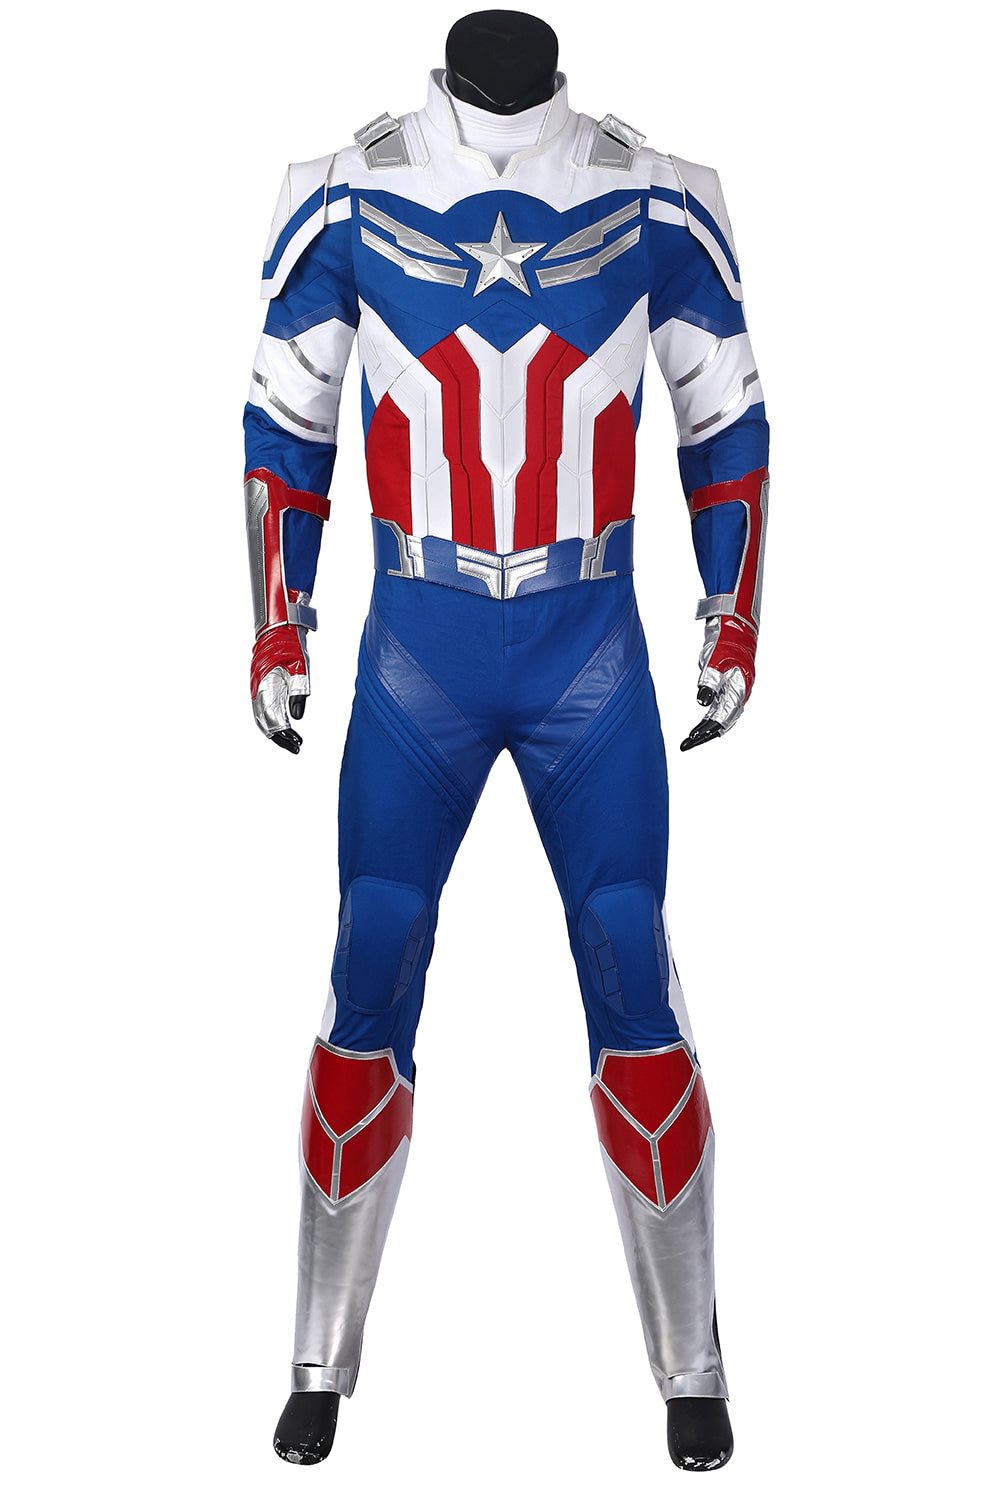 falcon captain america winter soldier stealth mens boys new adult Captain America Cosplay Costume Suit outfit uniform By CosplayLab